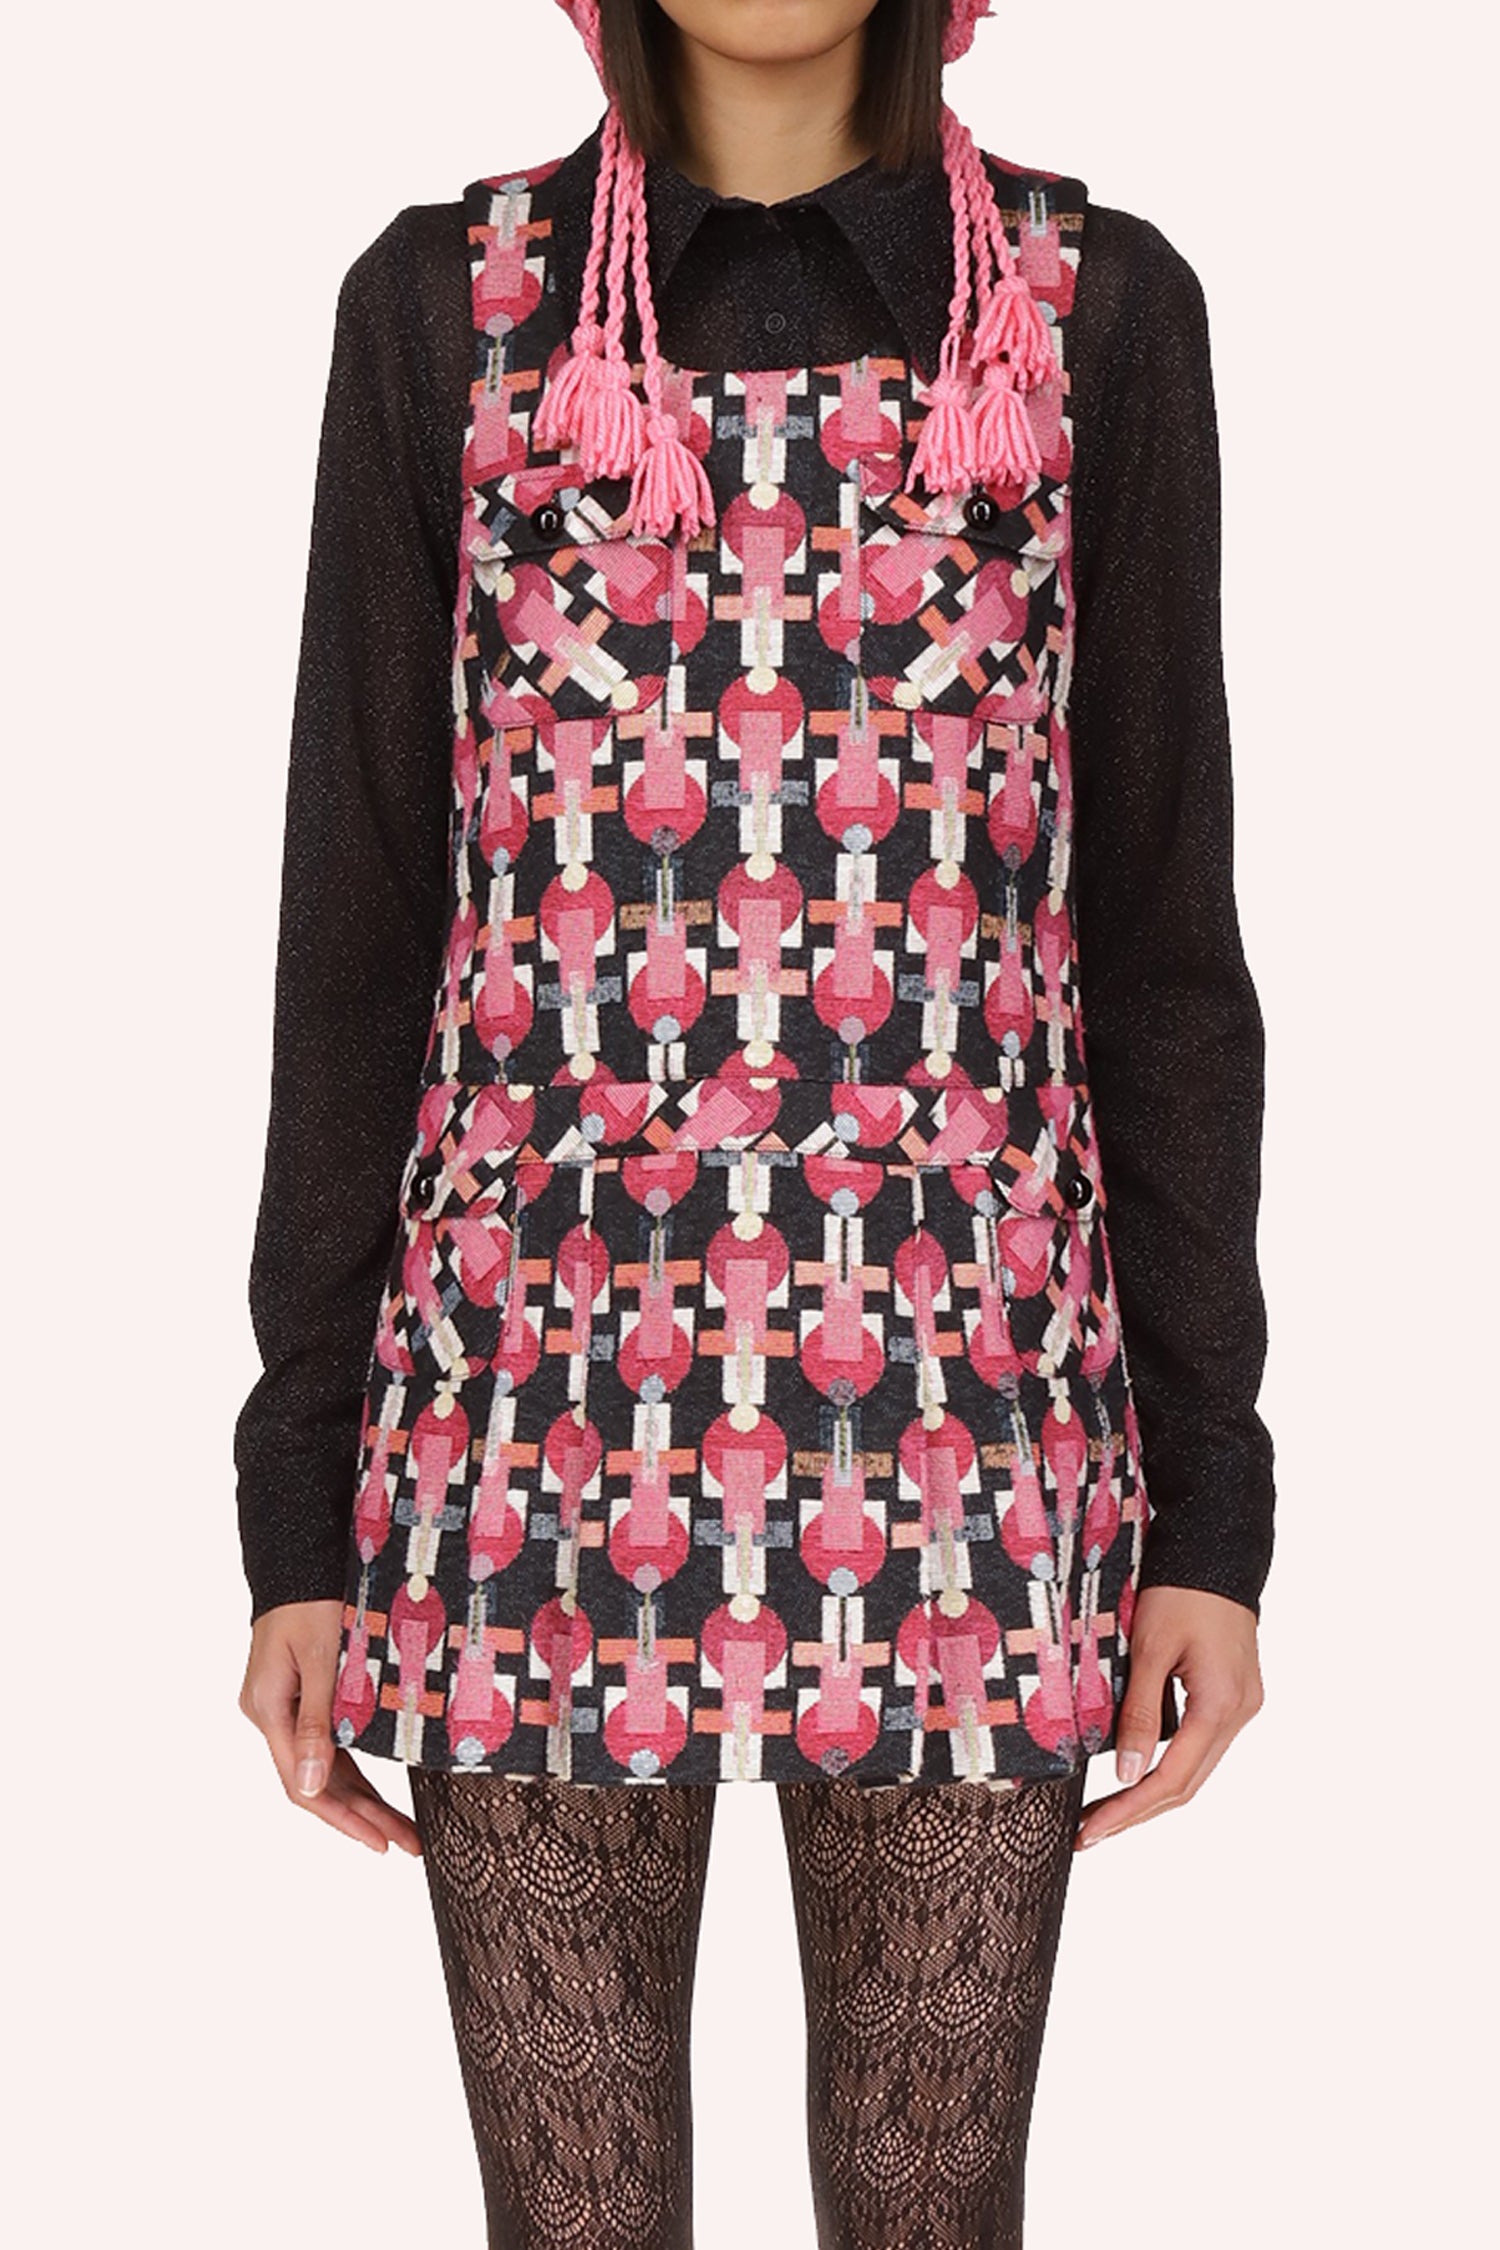 Geo Jacquard Pleated Dress Rose Multi, floral pattern shades of, light pink and red on black